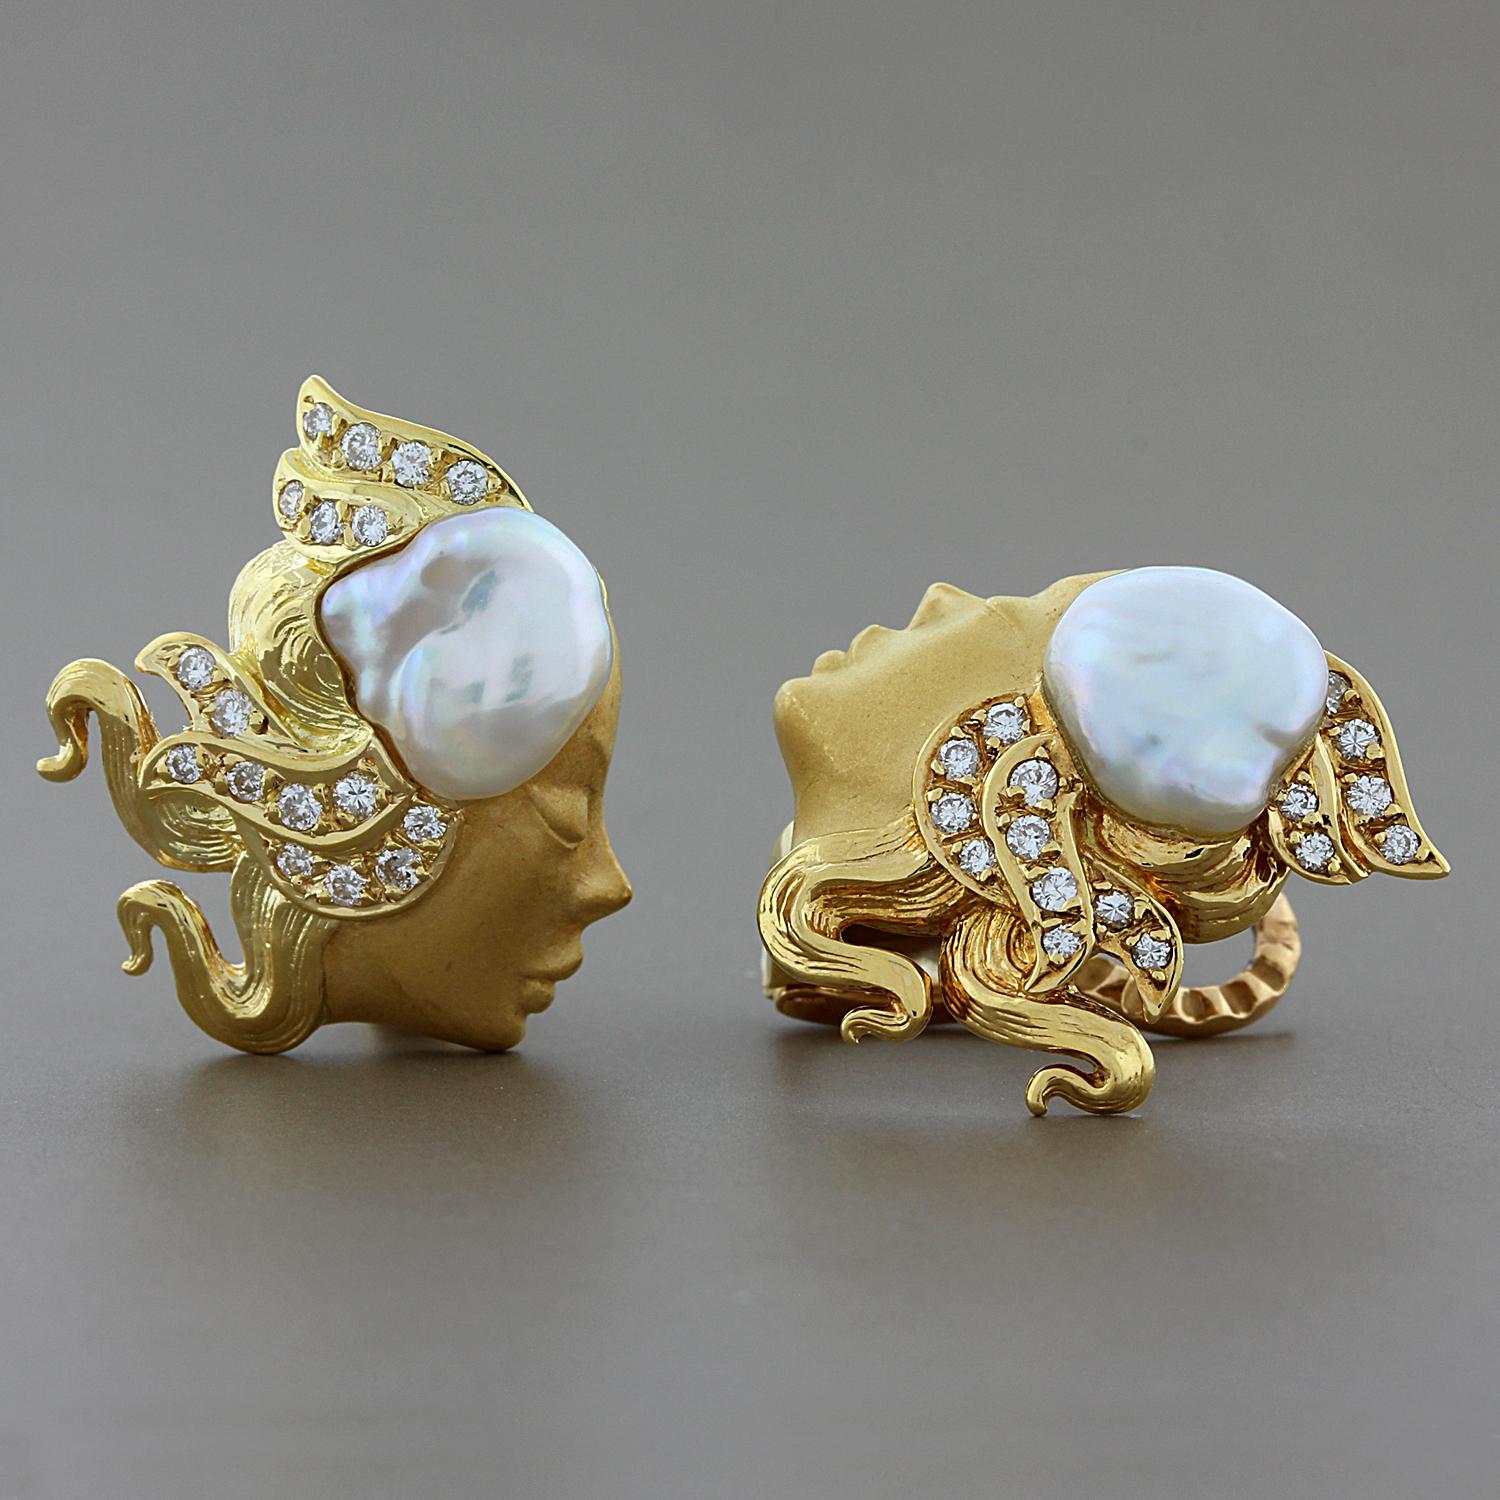 Sleeping Beauty!  GIA certified 18K yellow gold baroque pearl earrings by the famous Spanish designers Carrera y Carrera. Their style is unmistakable! The earrings have a brushed gold finish featuring a pair of matching lustrous freshwater baroque